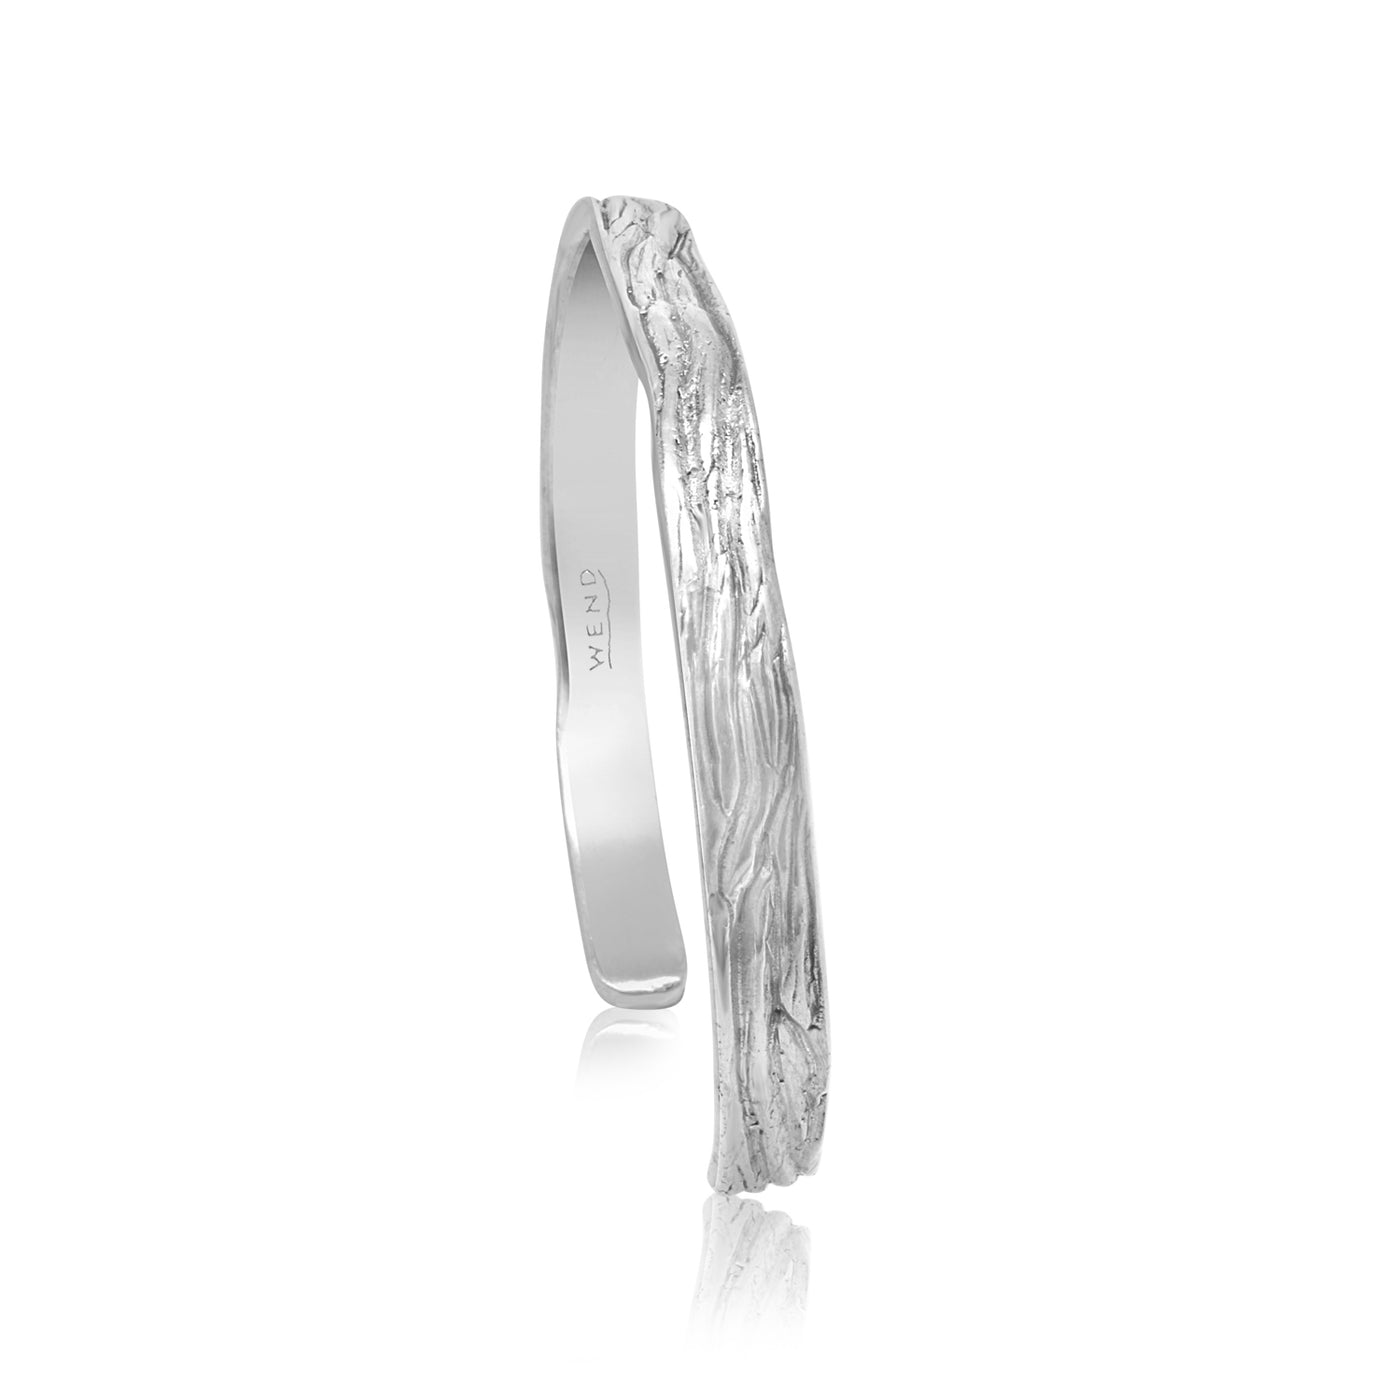 Roots White Gold Cuff Bracelet